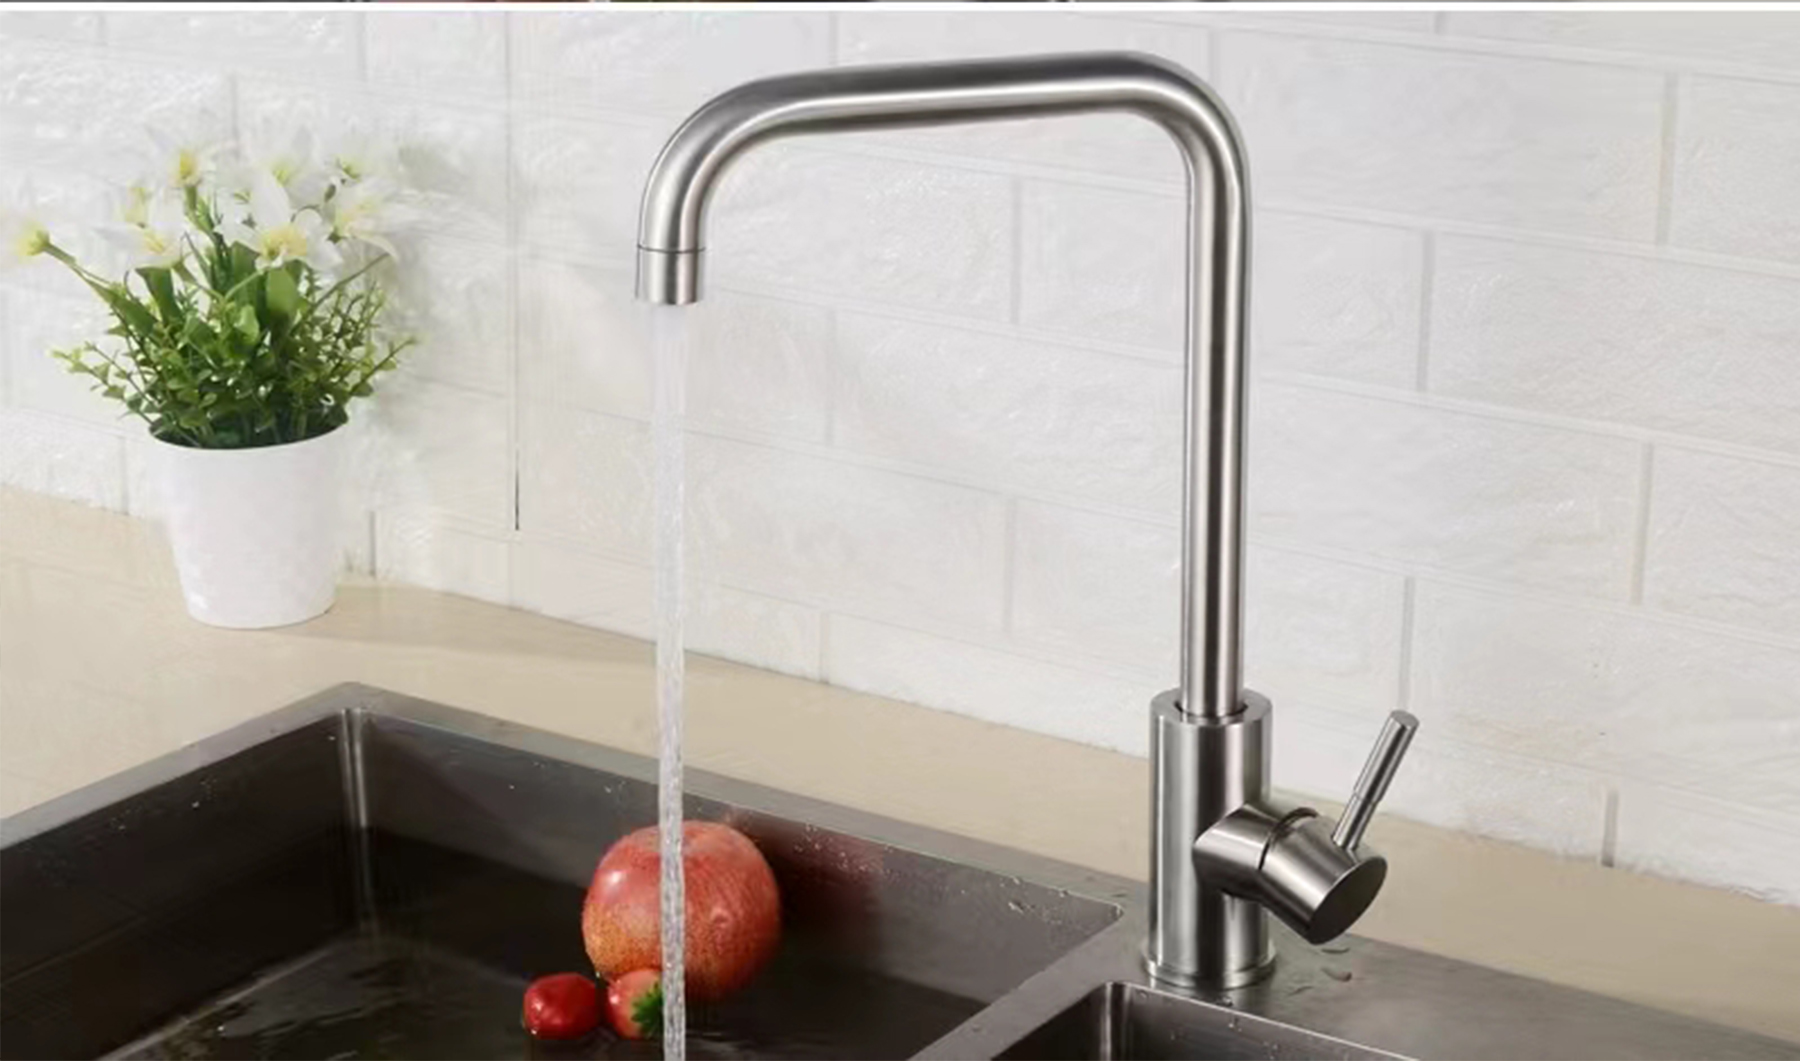 Sink sink with rotating stainless steel hot and cold faucet1